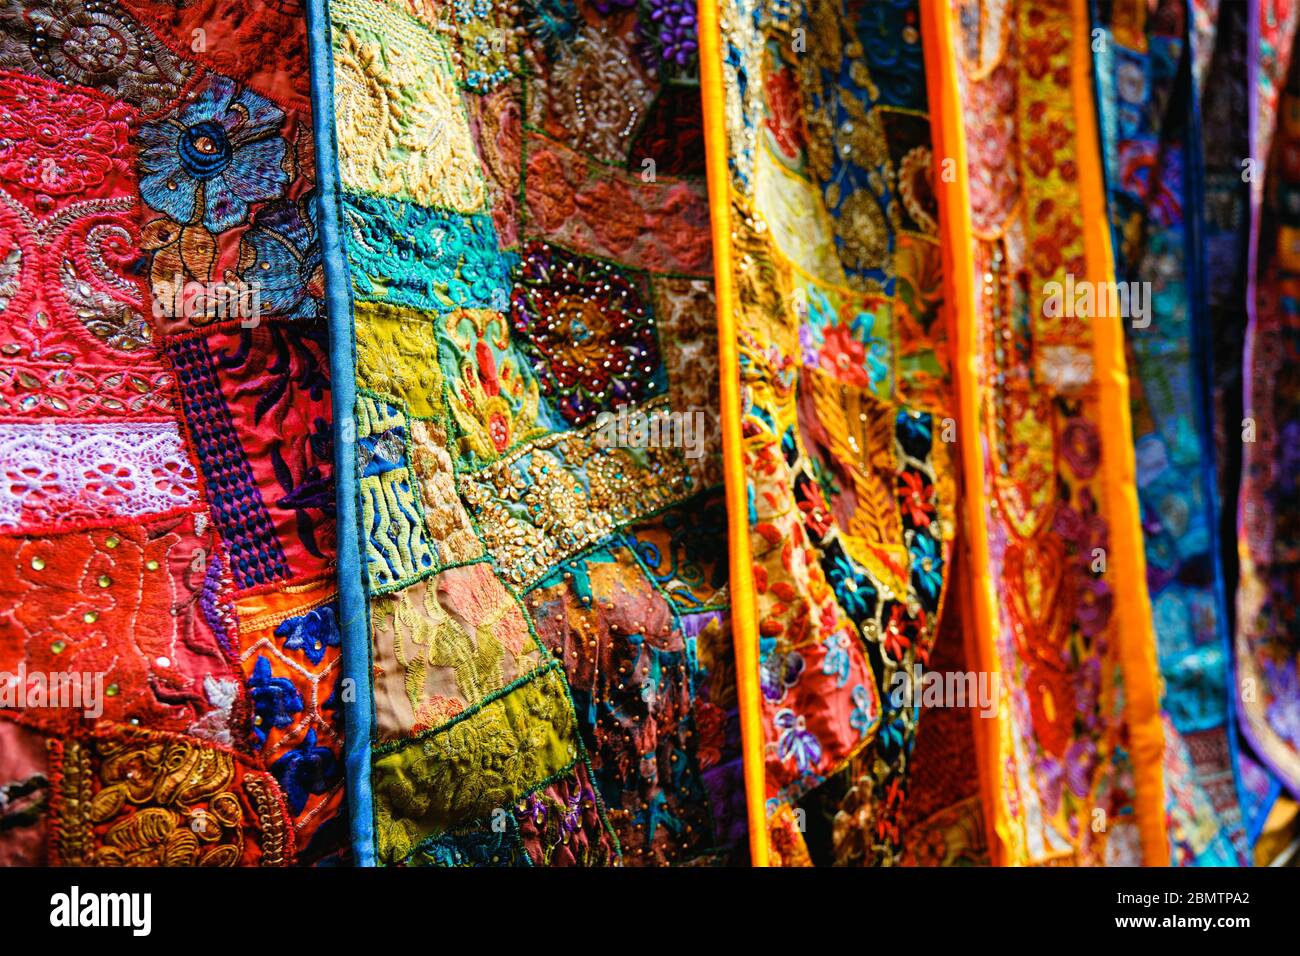 Indian fabric with Indian patterns close up. Stock Photo